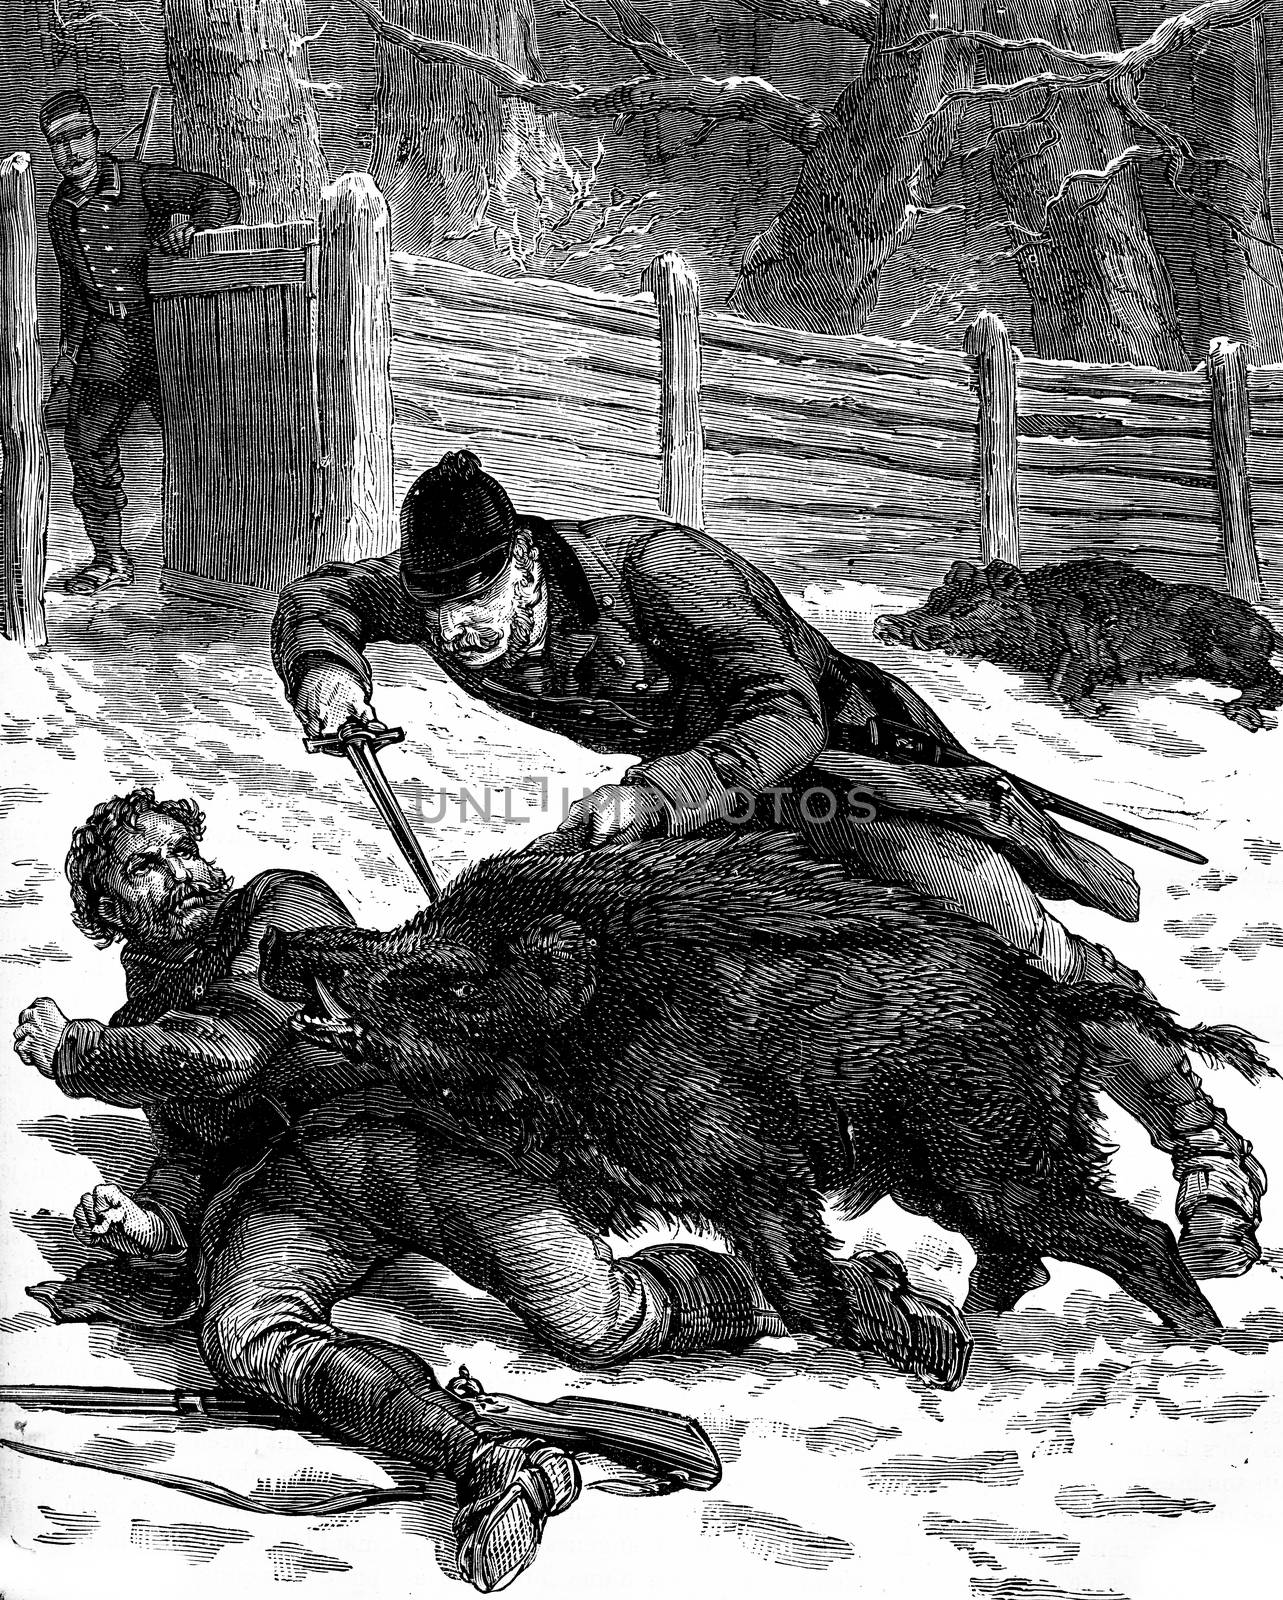 A boar hunt. One of the animals was thrown over a guard, vintage engraved illustration. Journal des Voyages, Travel Journal, (1879-80).